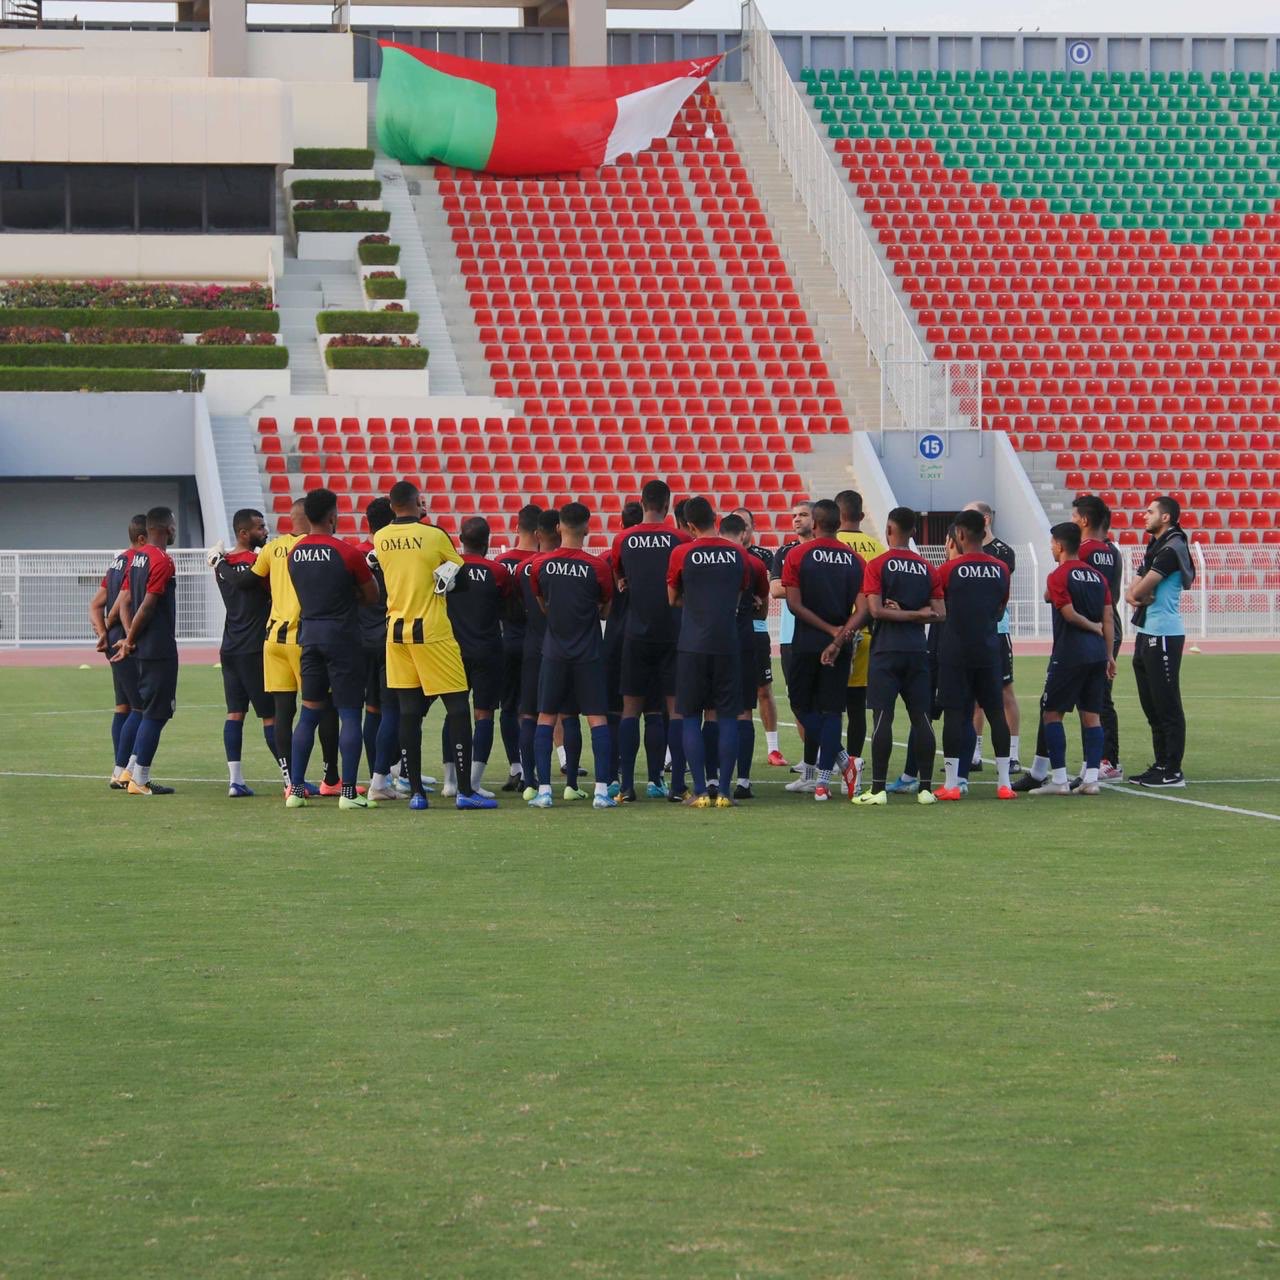 Preparations underway for Oman-India football match